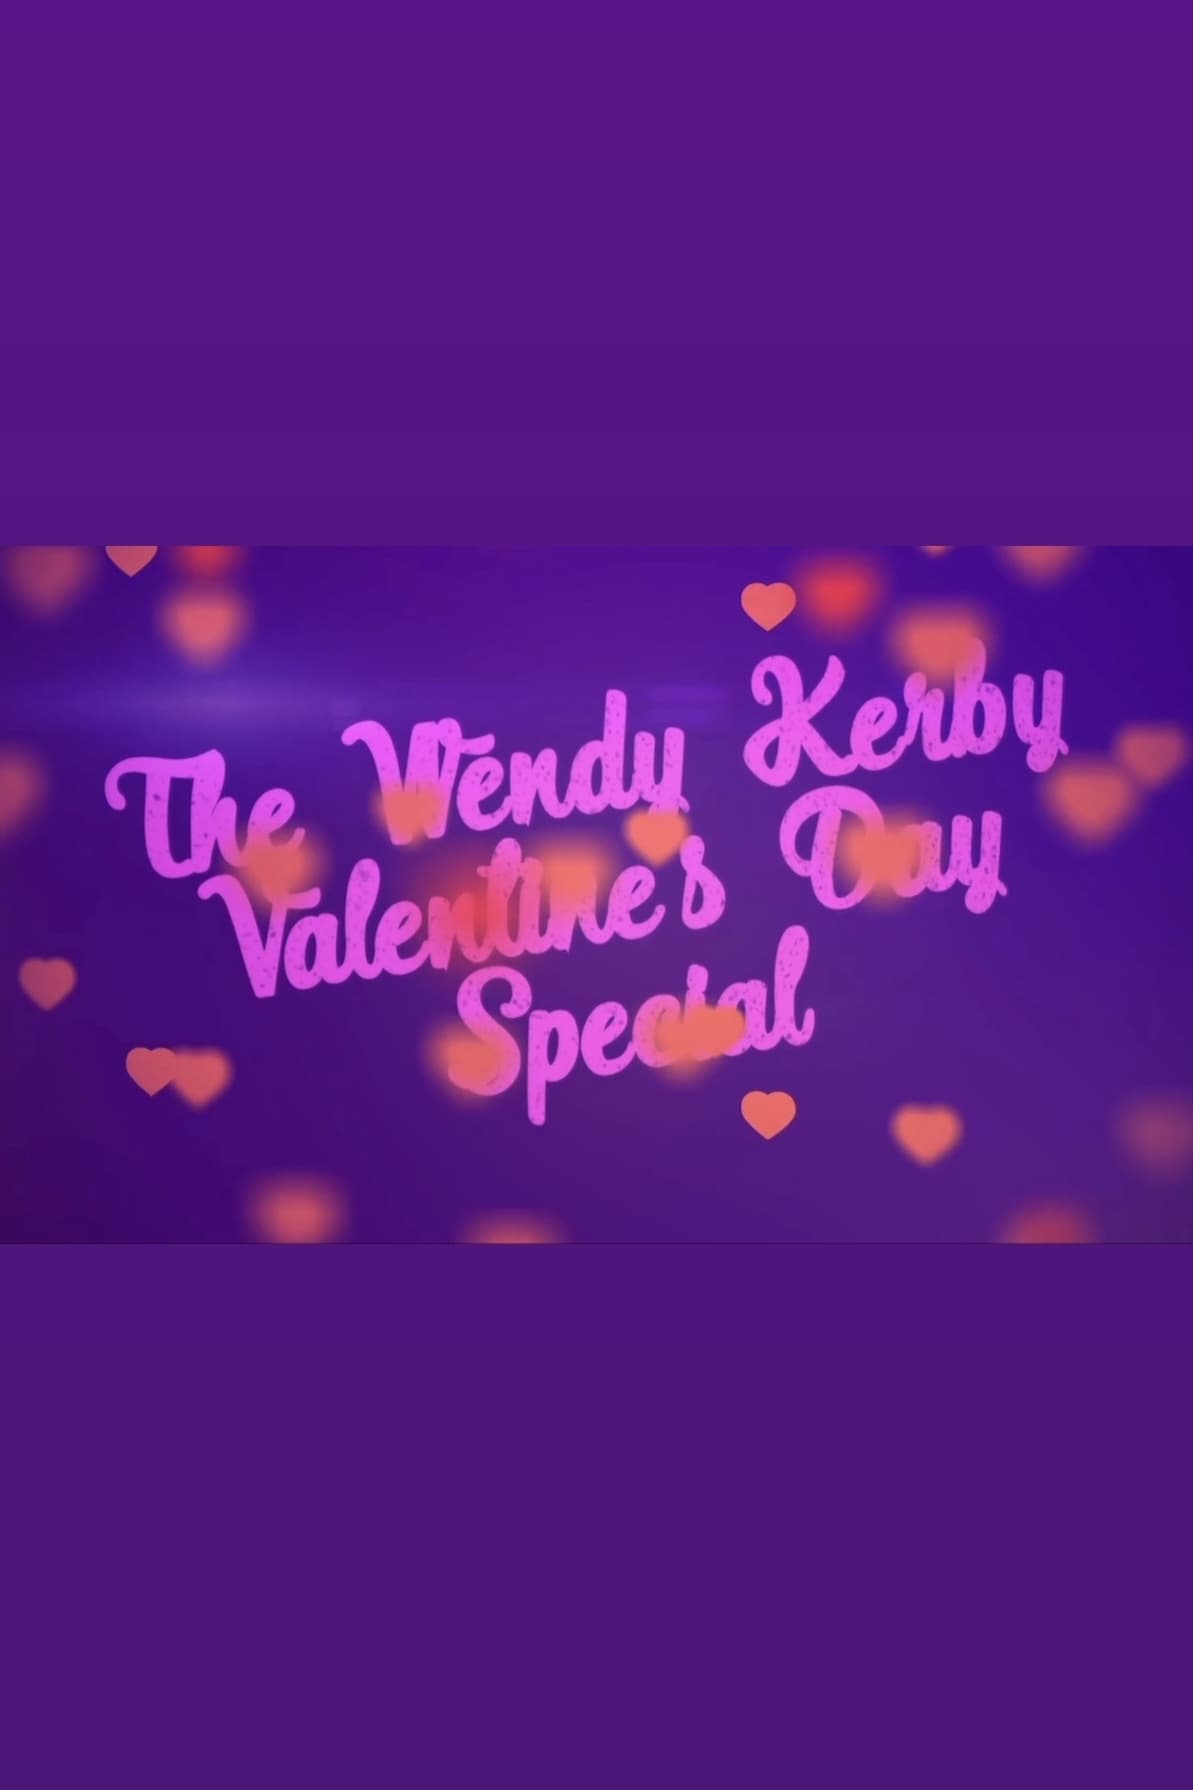 The Wendy Kerby Valentine’s Day Special